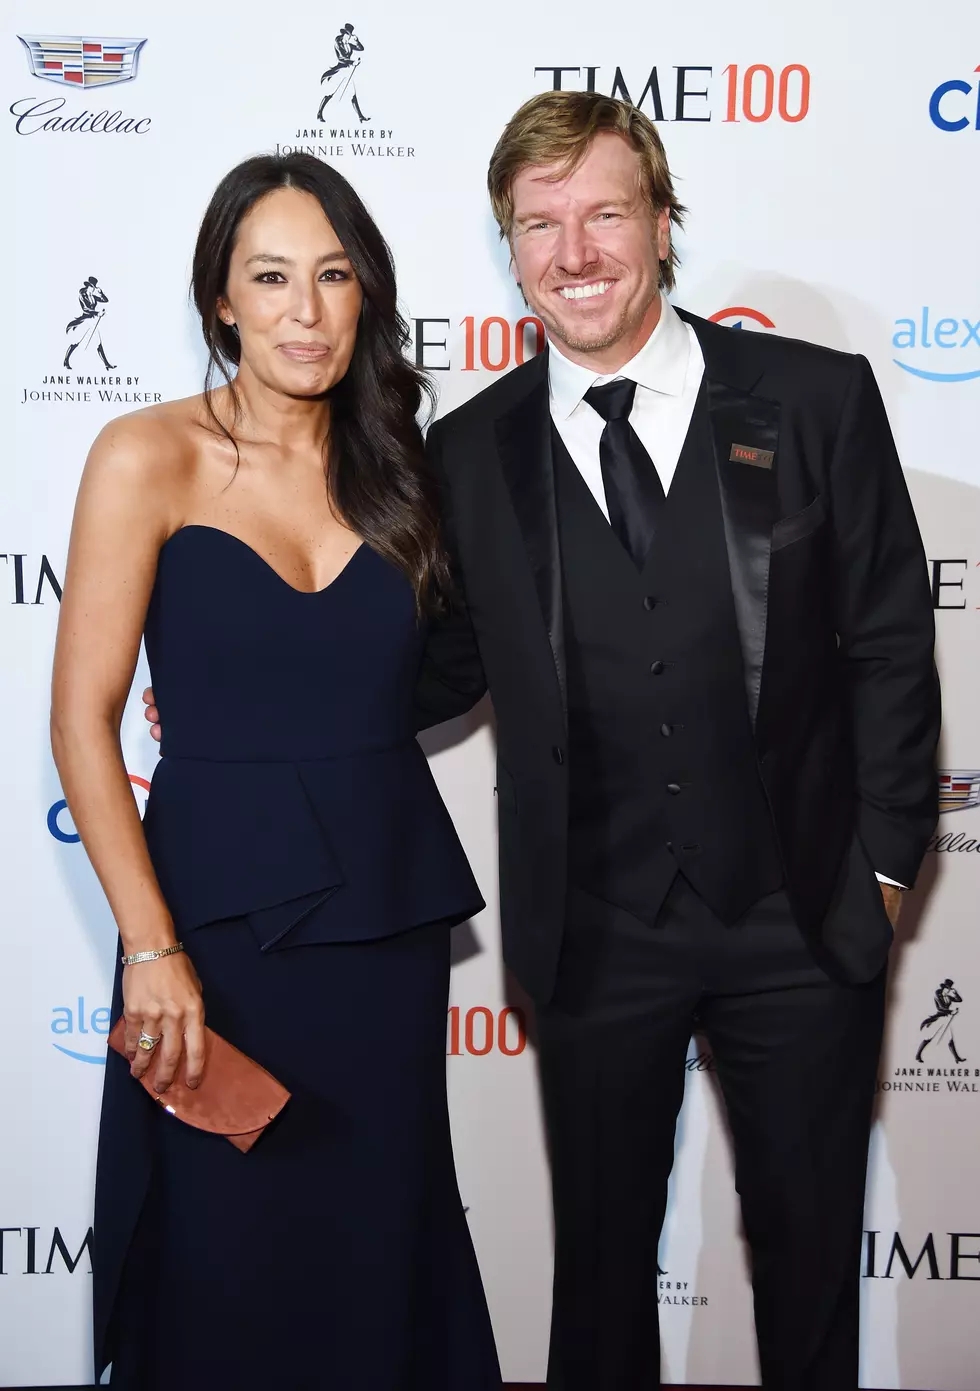 Just How Big are Chip and Joanna Gaines?